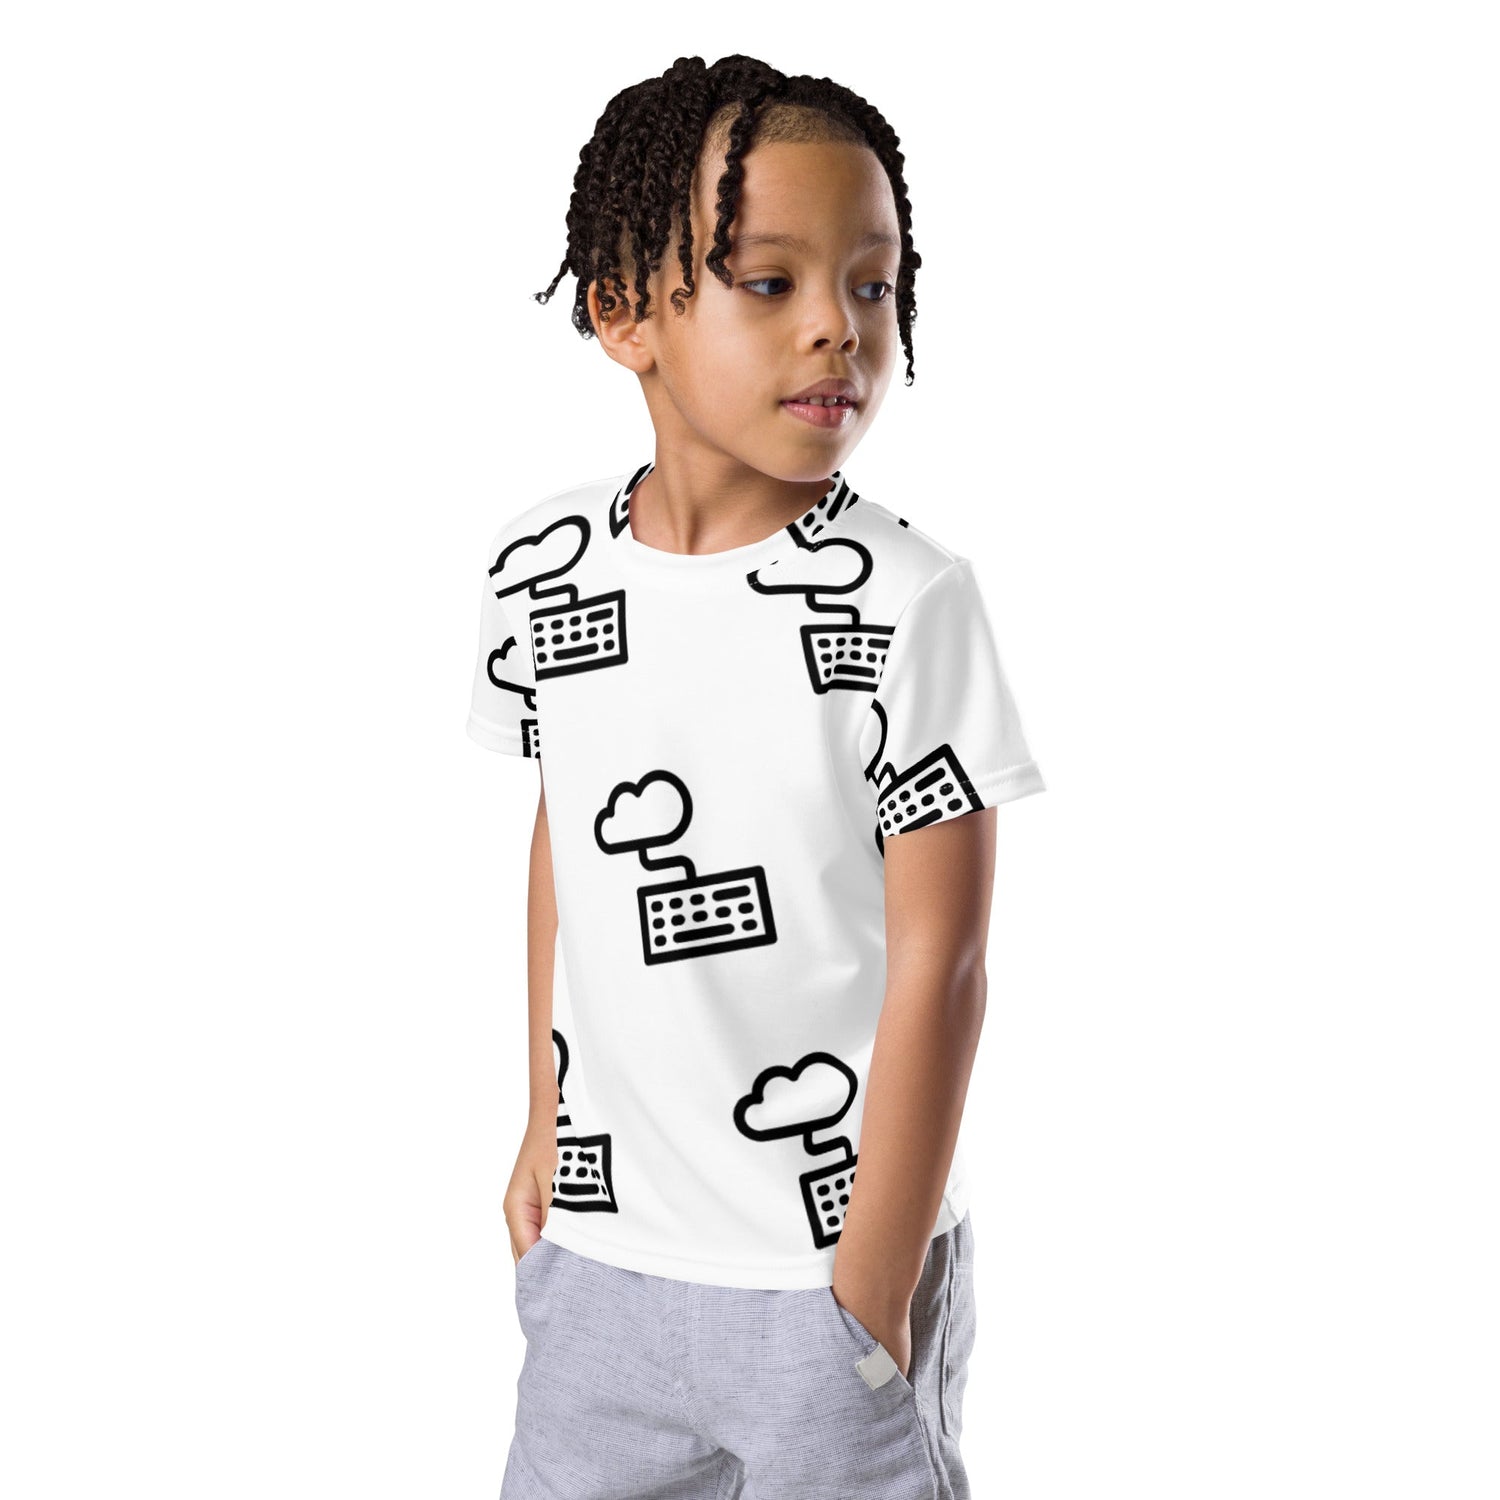 Kids Clothing & Accessories